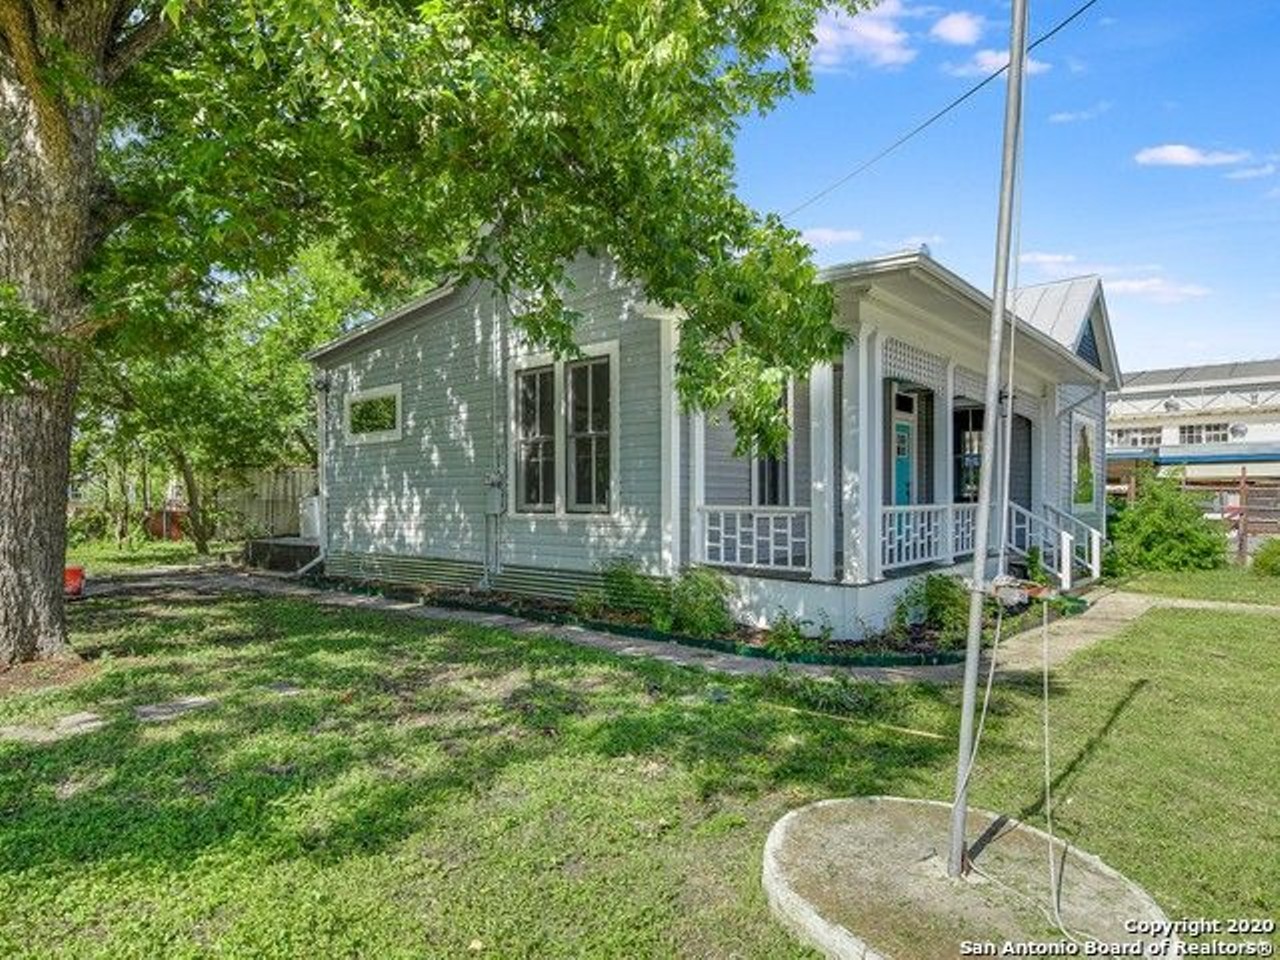 This 1897 Bungalow Might Be the Cutest Little House for Sale in San Antonio Right Now